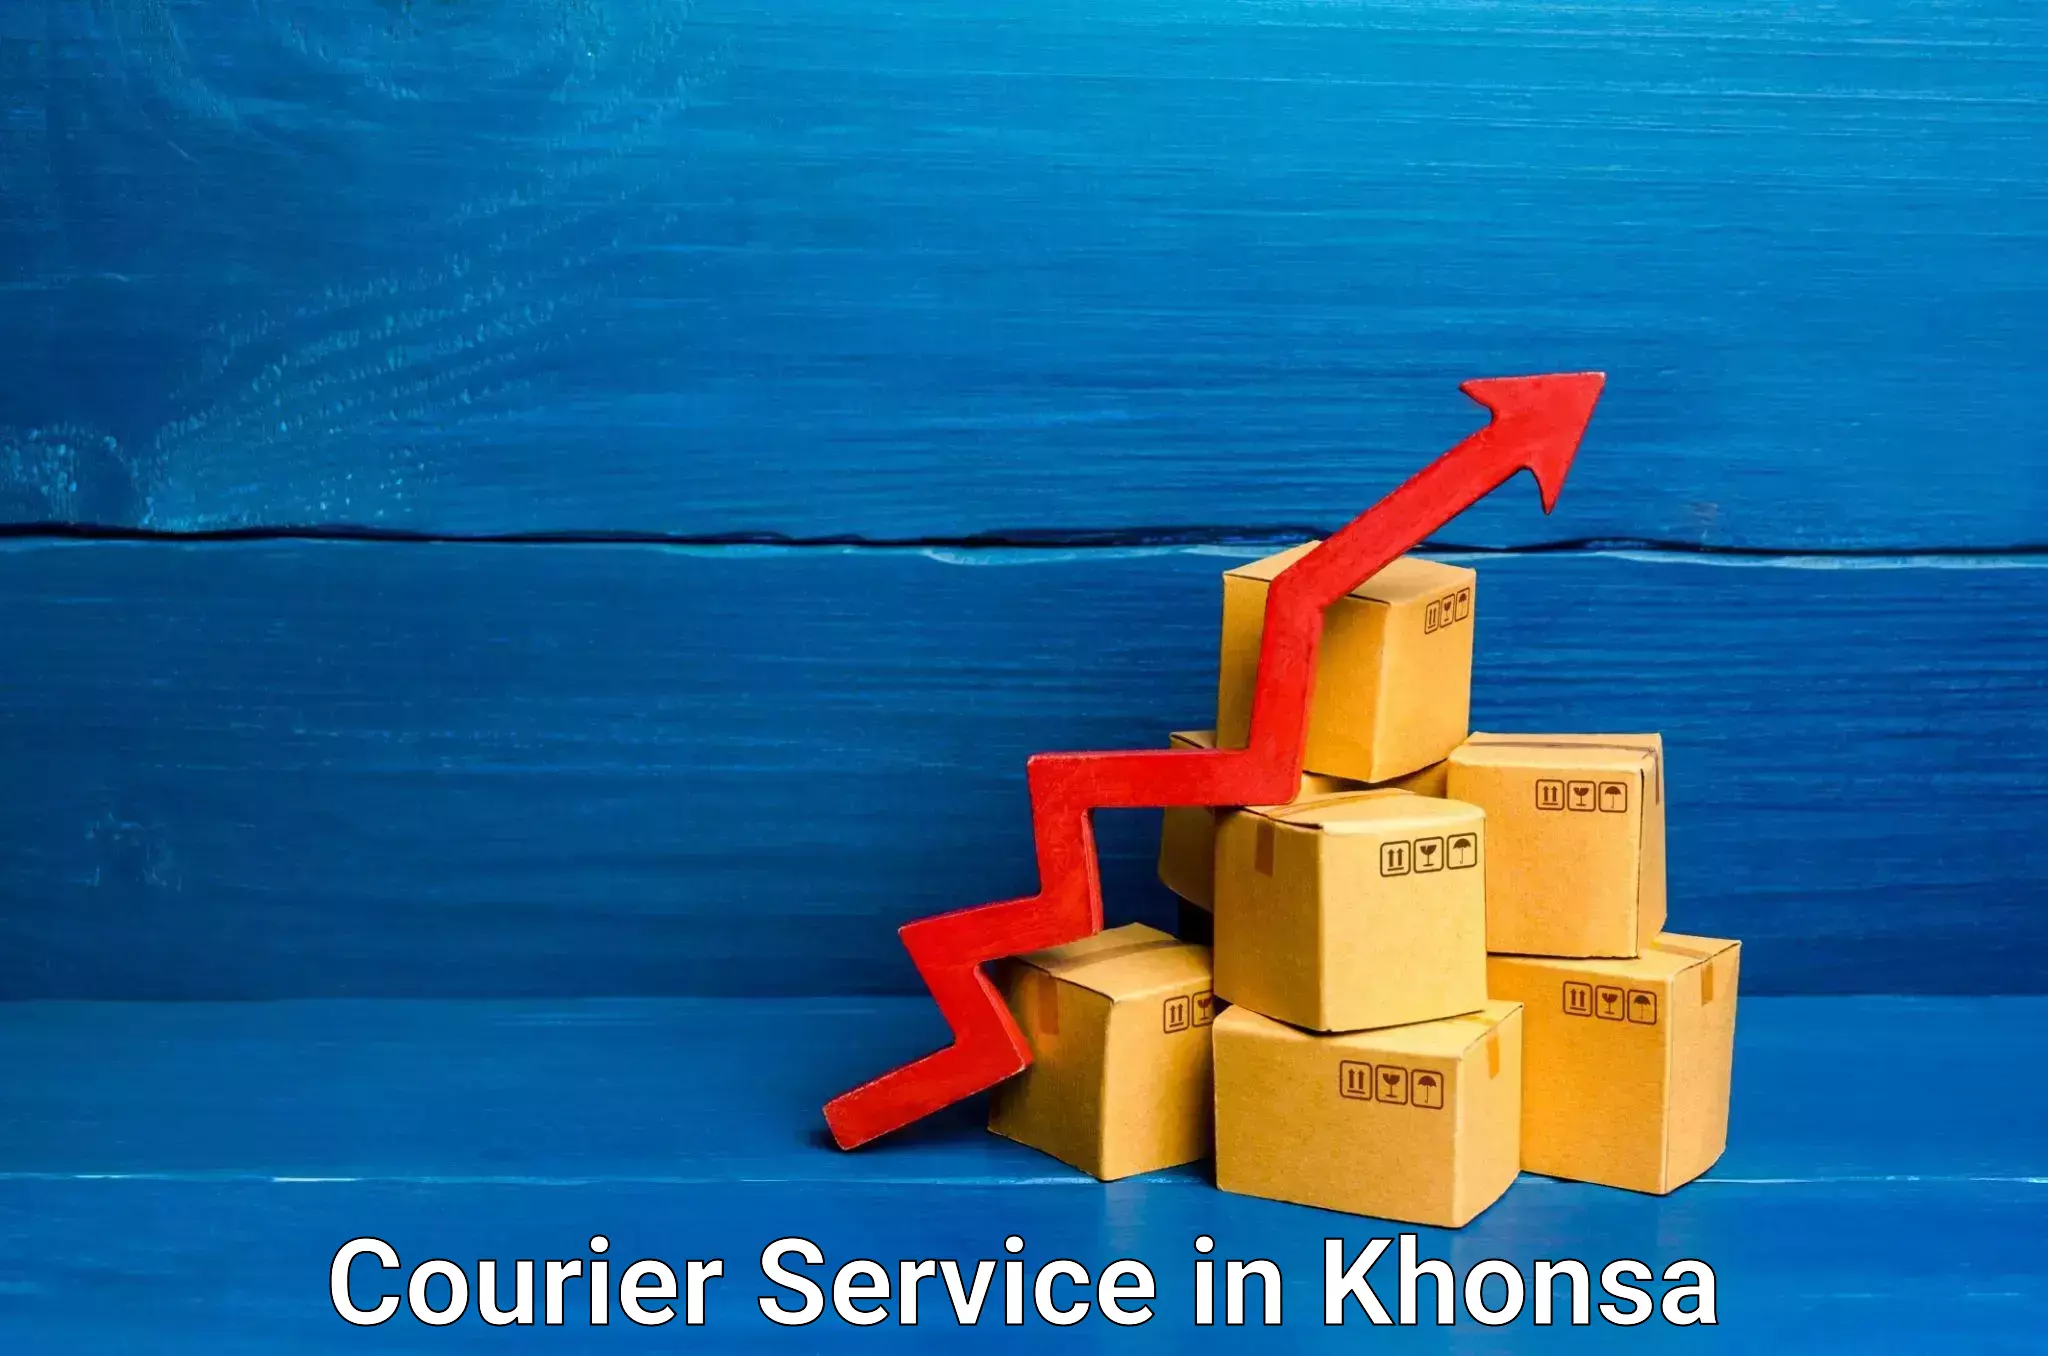 Courier dispatch services in Khonsa